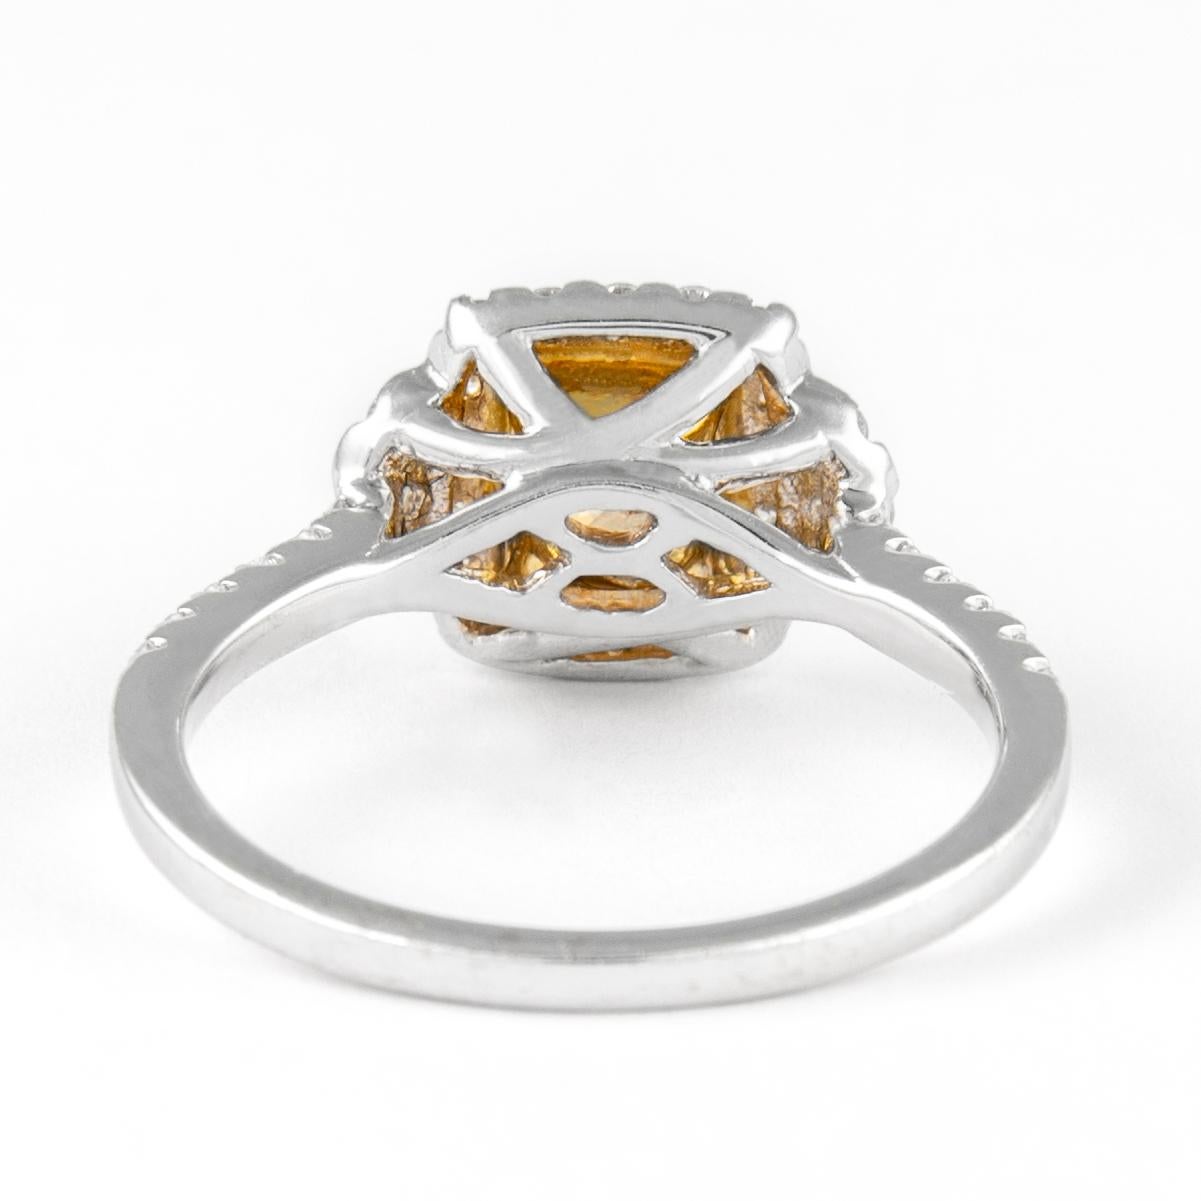 Alexander 1.38ctt Fancy Yellow Cushion Diamond with Halo Ring 18k Two Tone In New Condition For Sale In BEVERLY HILLS, CA